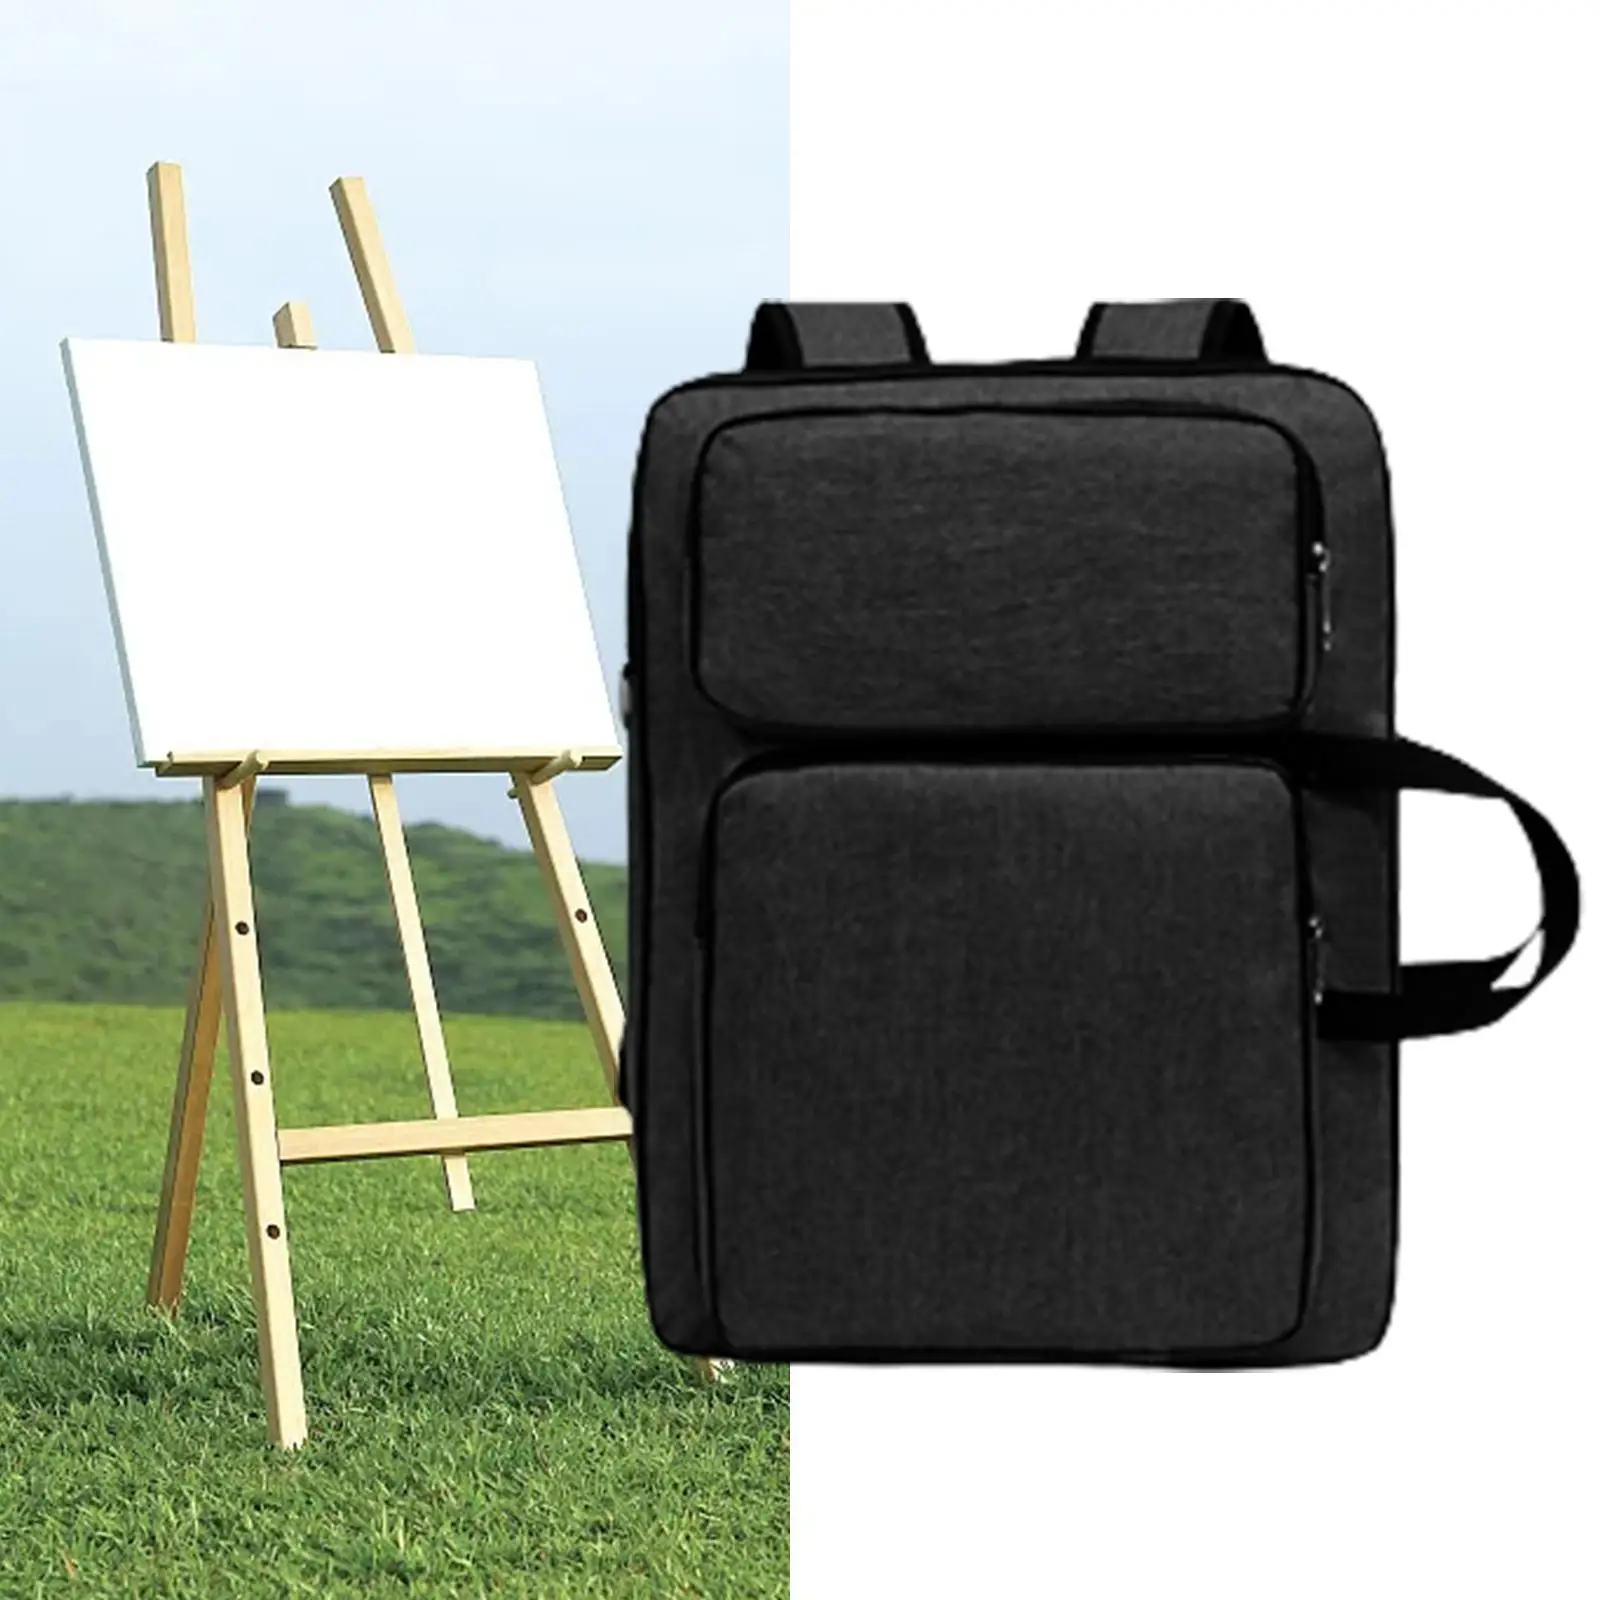 Draw Board Storage Tote Art Portfolio Case for Easel Paper Painting Supplies